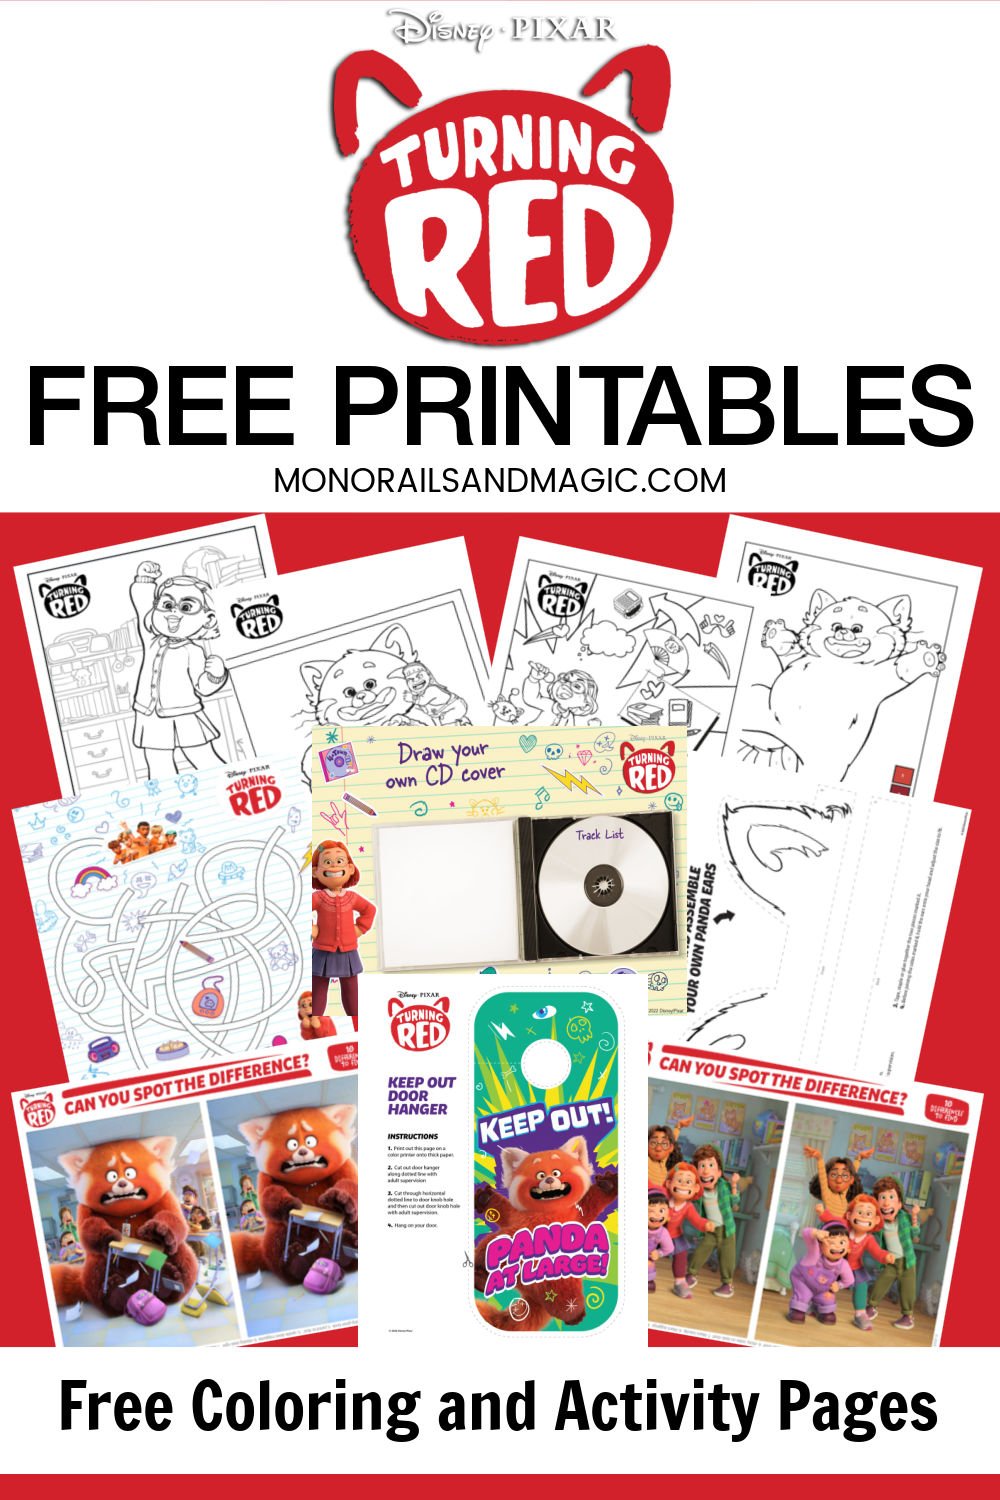 Coloring and activity pages for Disney/Pixar's Turning Red movie.